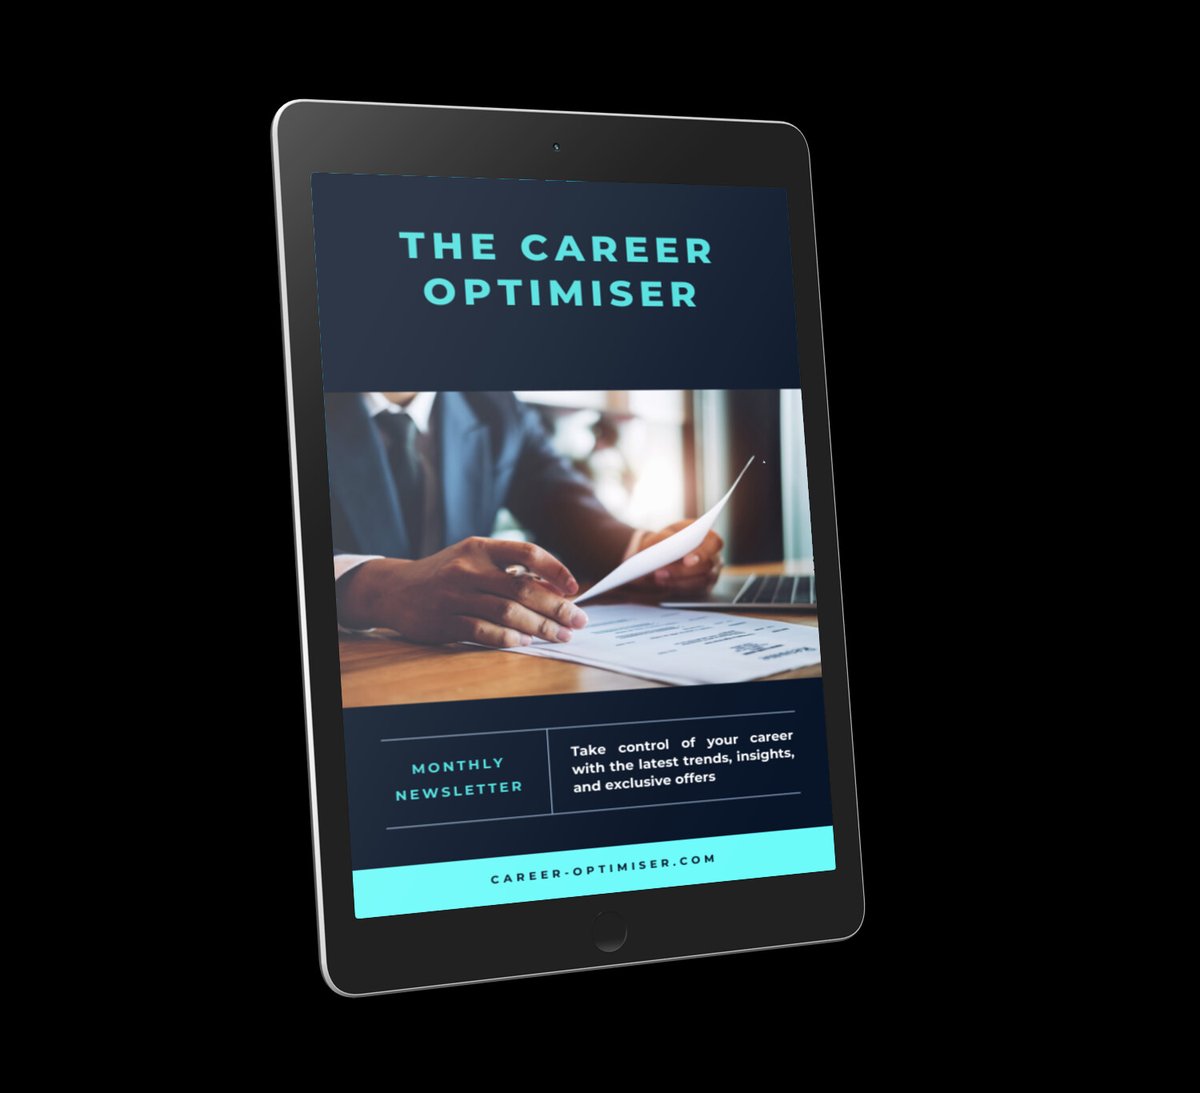 To keep the momentum going and ensure you never miss out on cutting-edge career advice, why not join my monthly newsletter:

career-optimiser.com/careeroptimise…

It’s packed with the latest news, unique insights, and exclusive offers.

#CareerCoach #CVWritingServices #CareerOptimisation